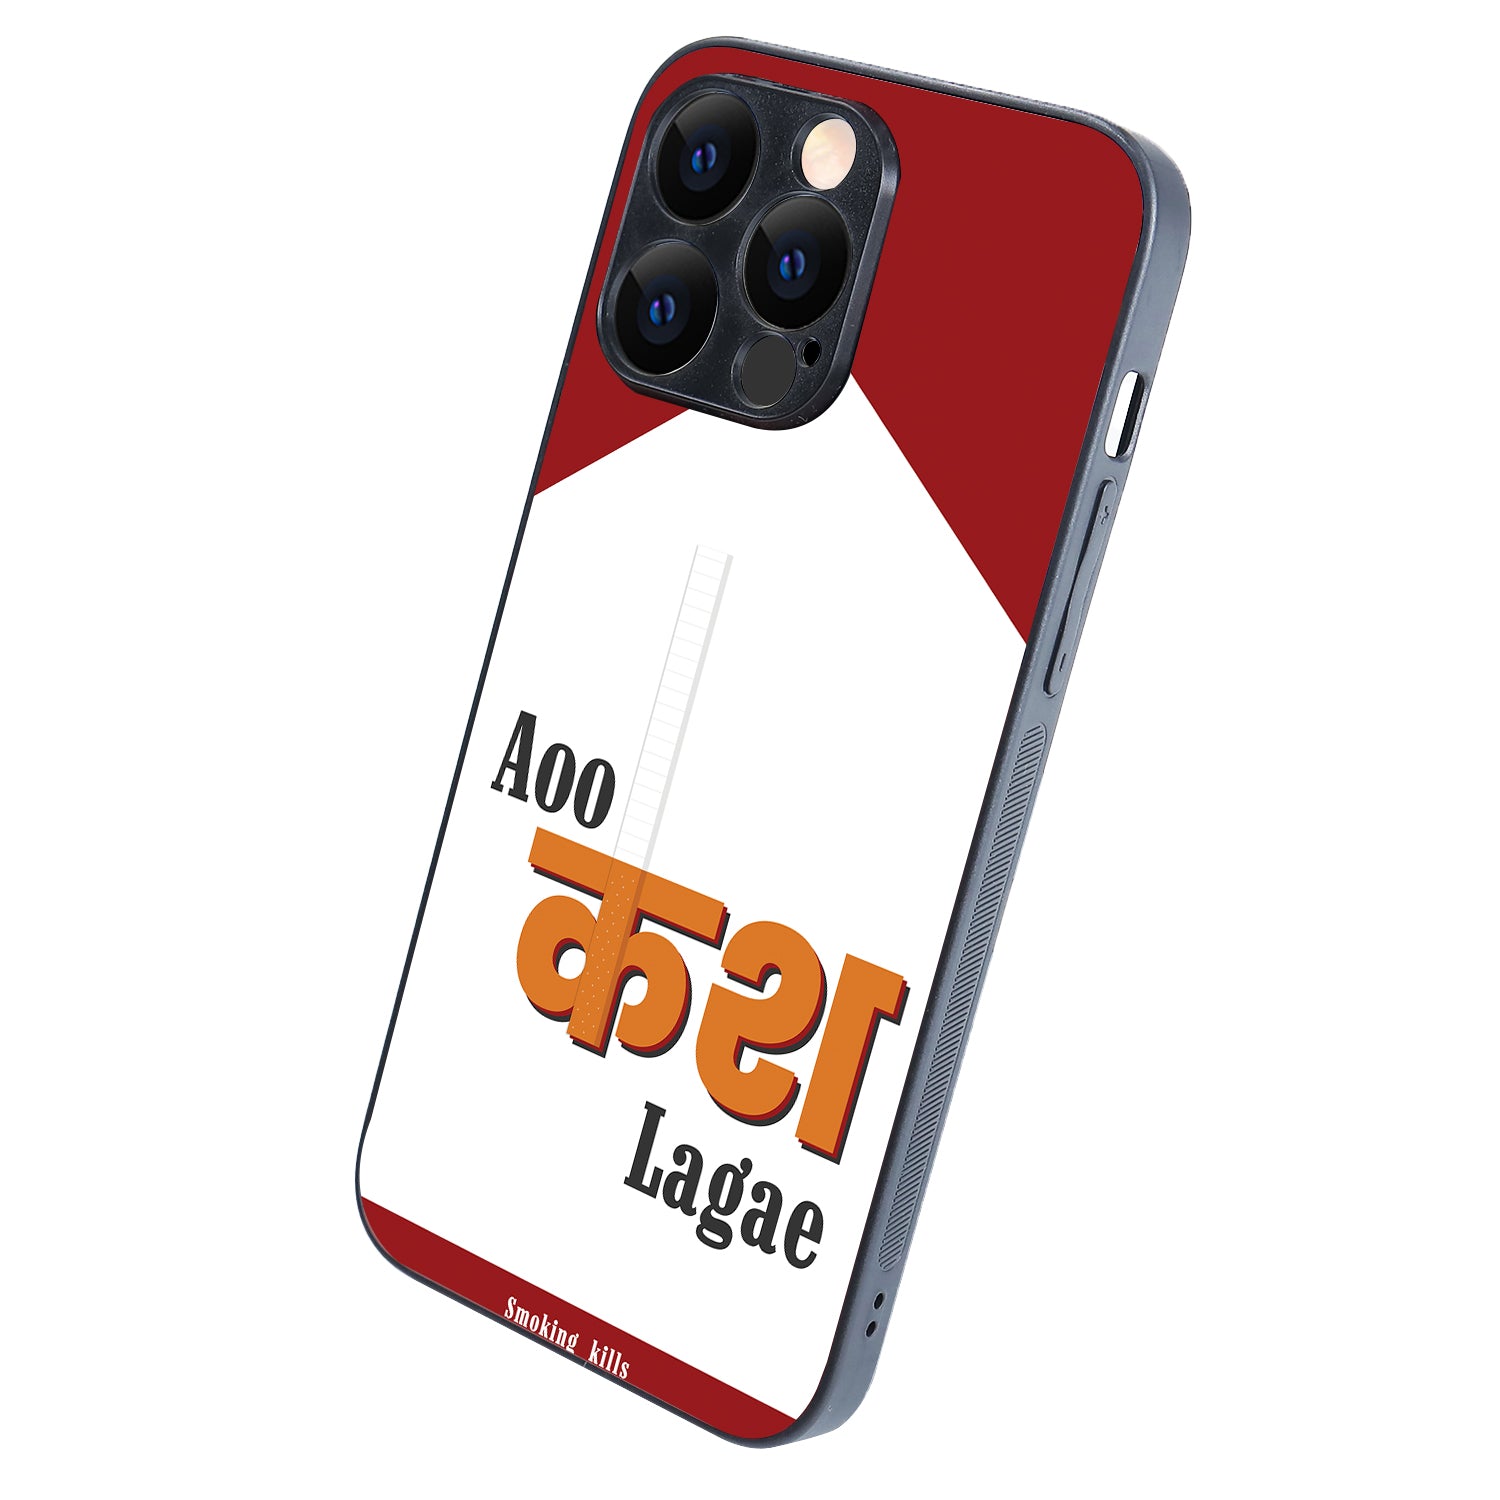 Aao Kash Lagaye Motivational Quotes iPhone 14 Pro Max Case